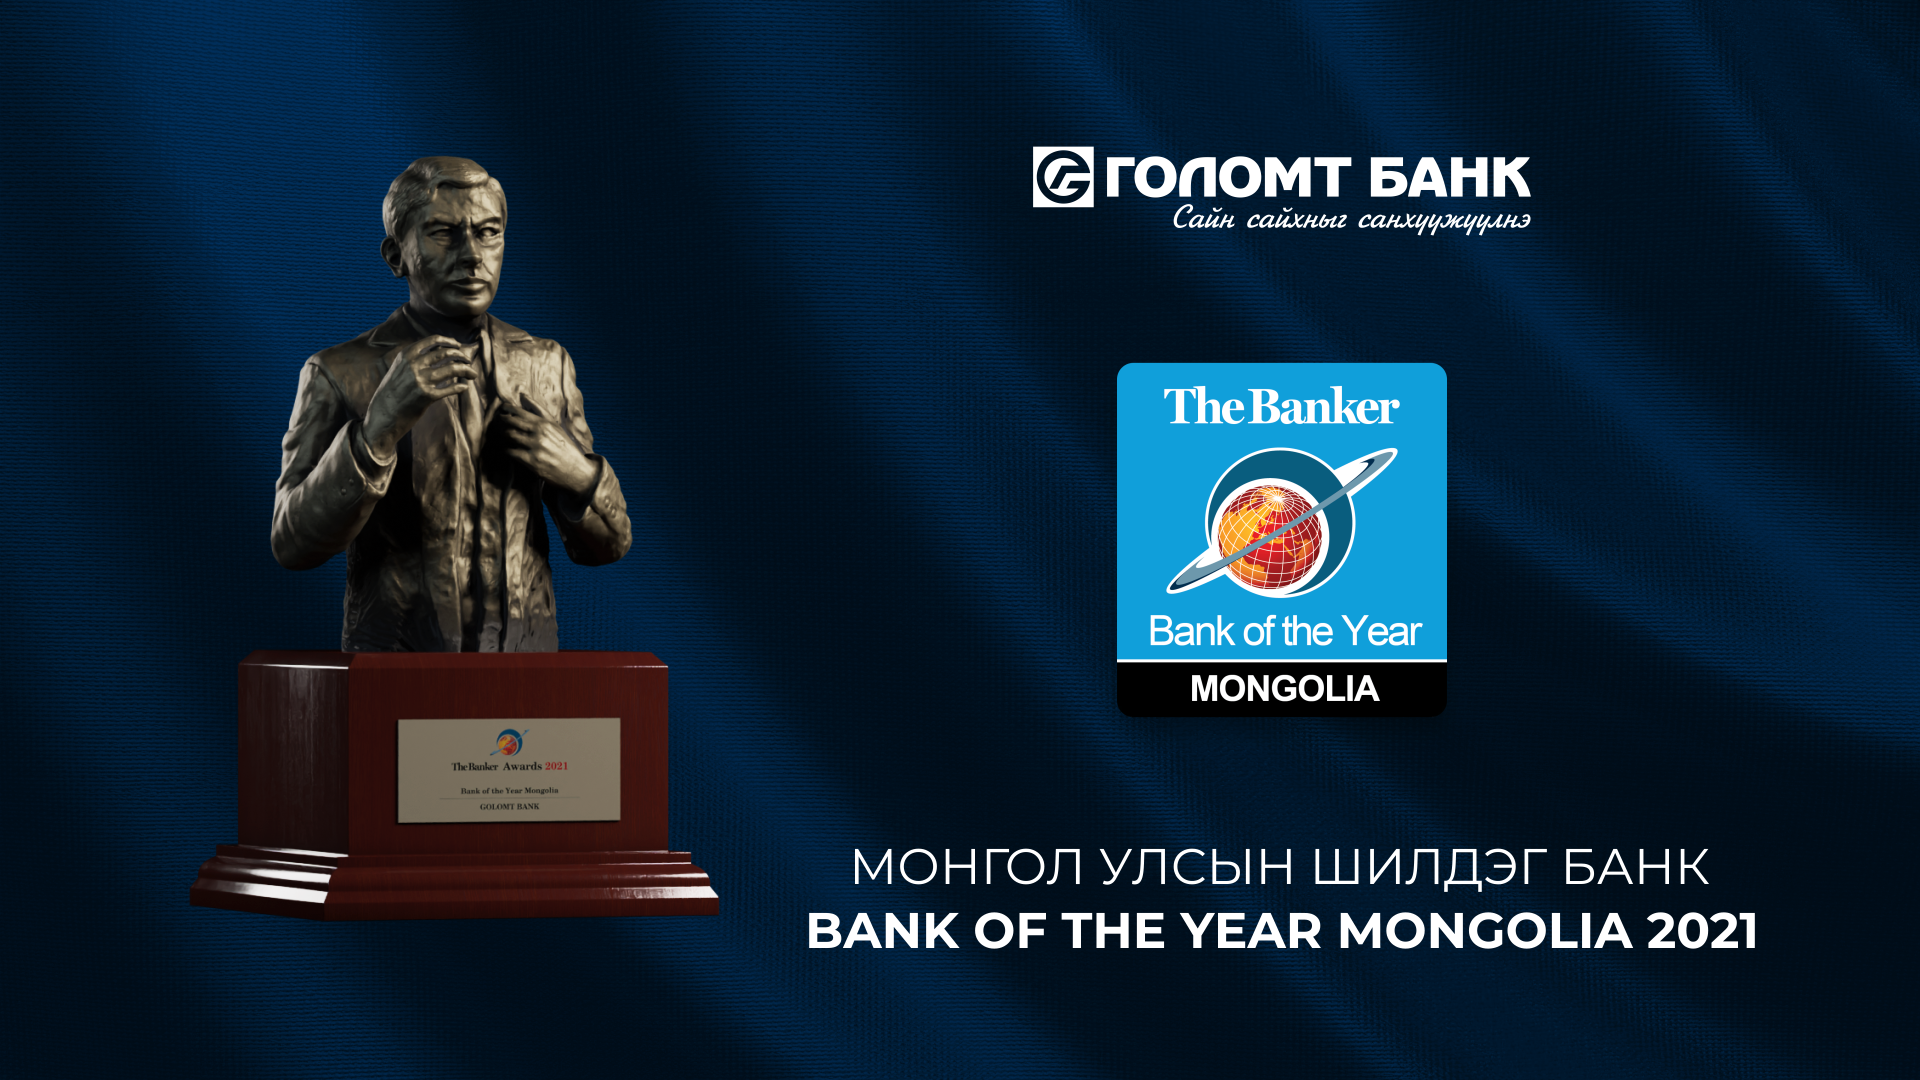 Golomt Bank named the “Bank of the Year of Mongolia” by “The Banker”